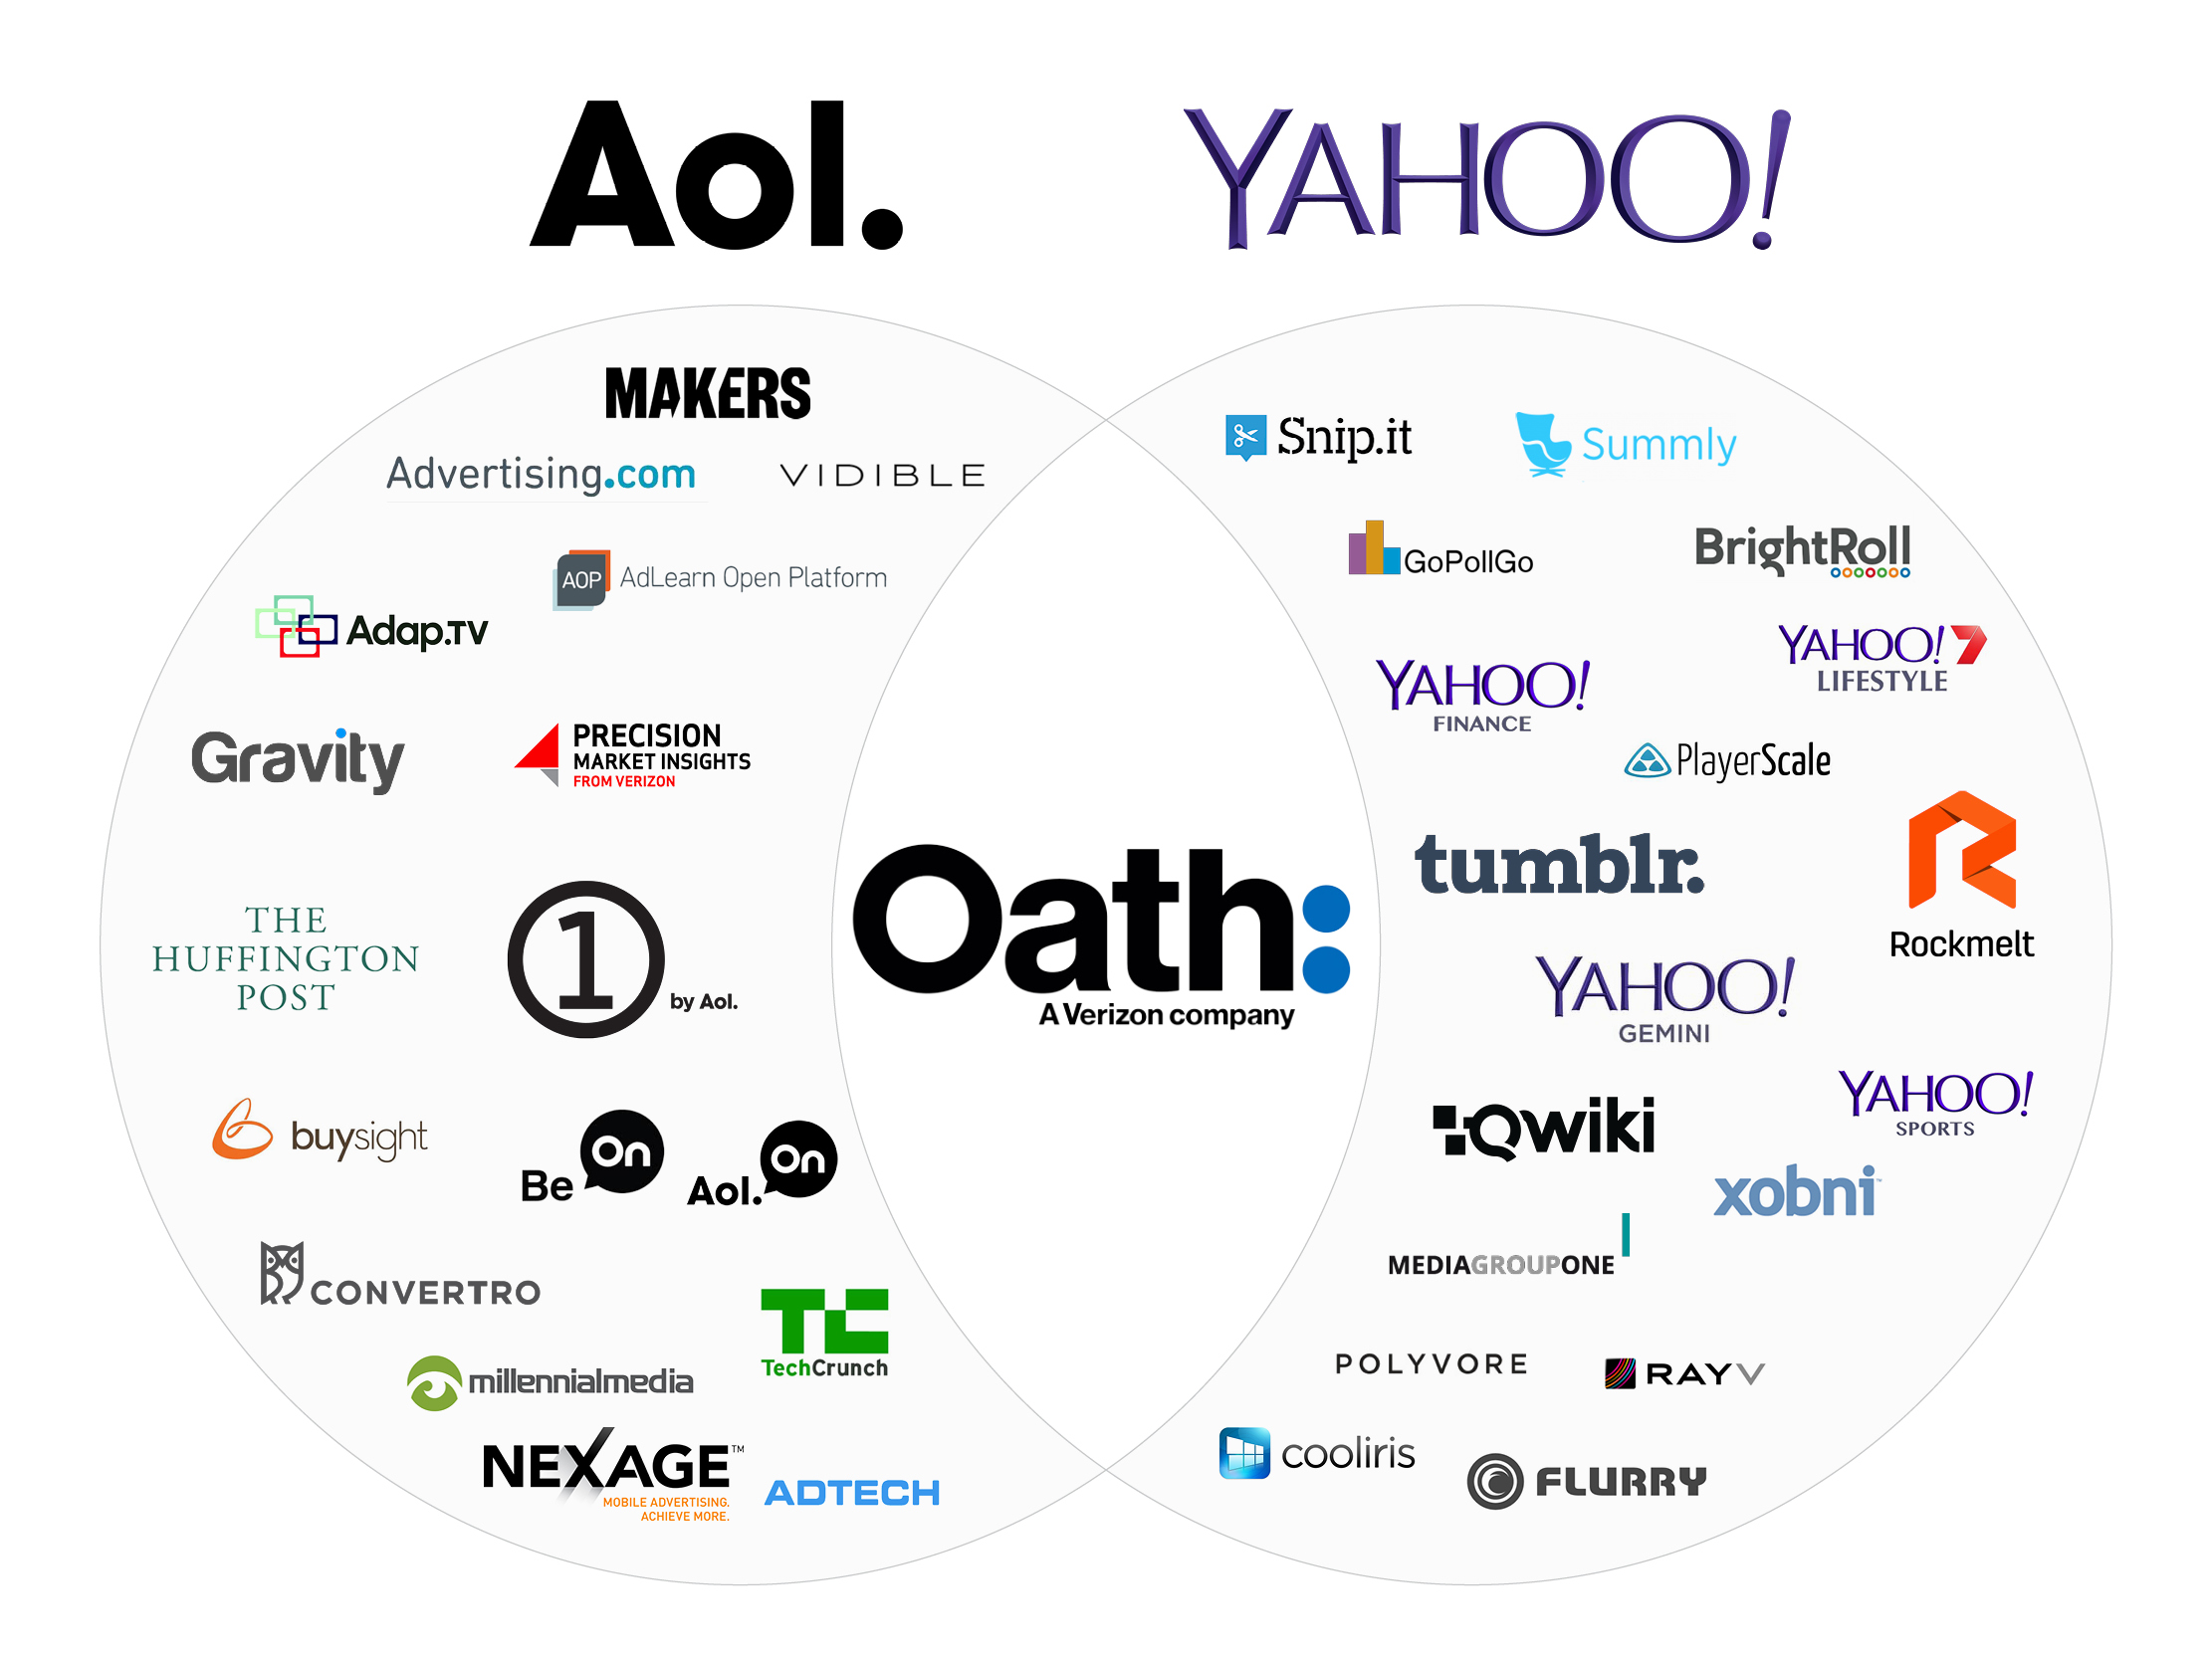 Internet trailblazers Yahoo and AOL are sold again, for $5 Billion